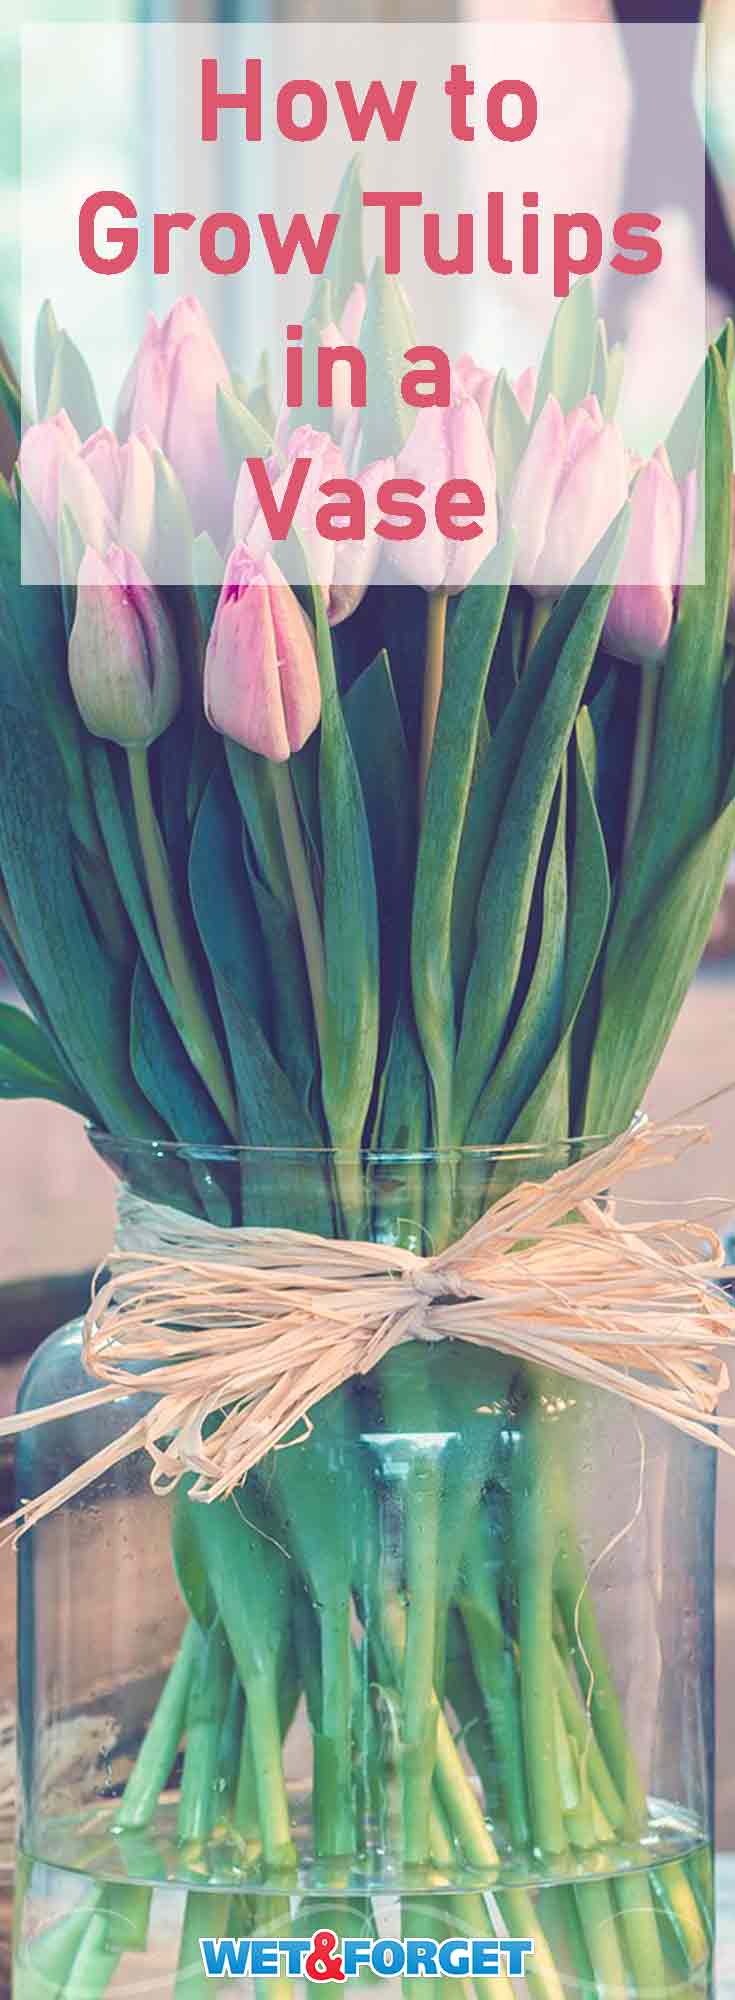 Discover the secret to growing tulips in a vase with our easy guide!